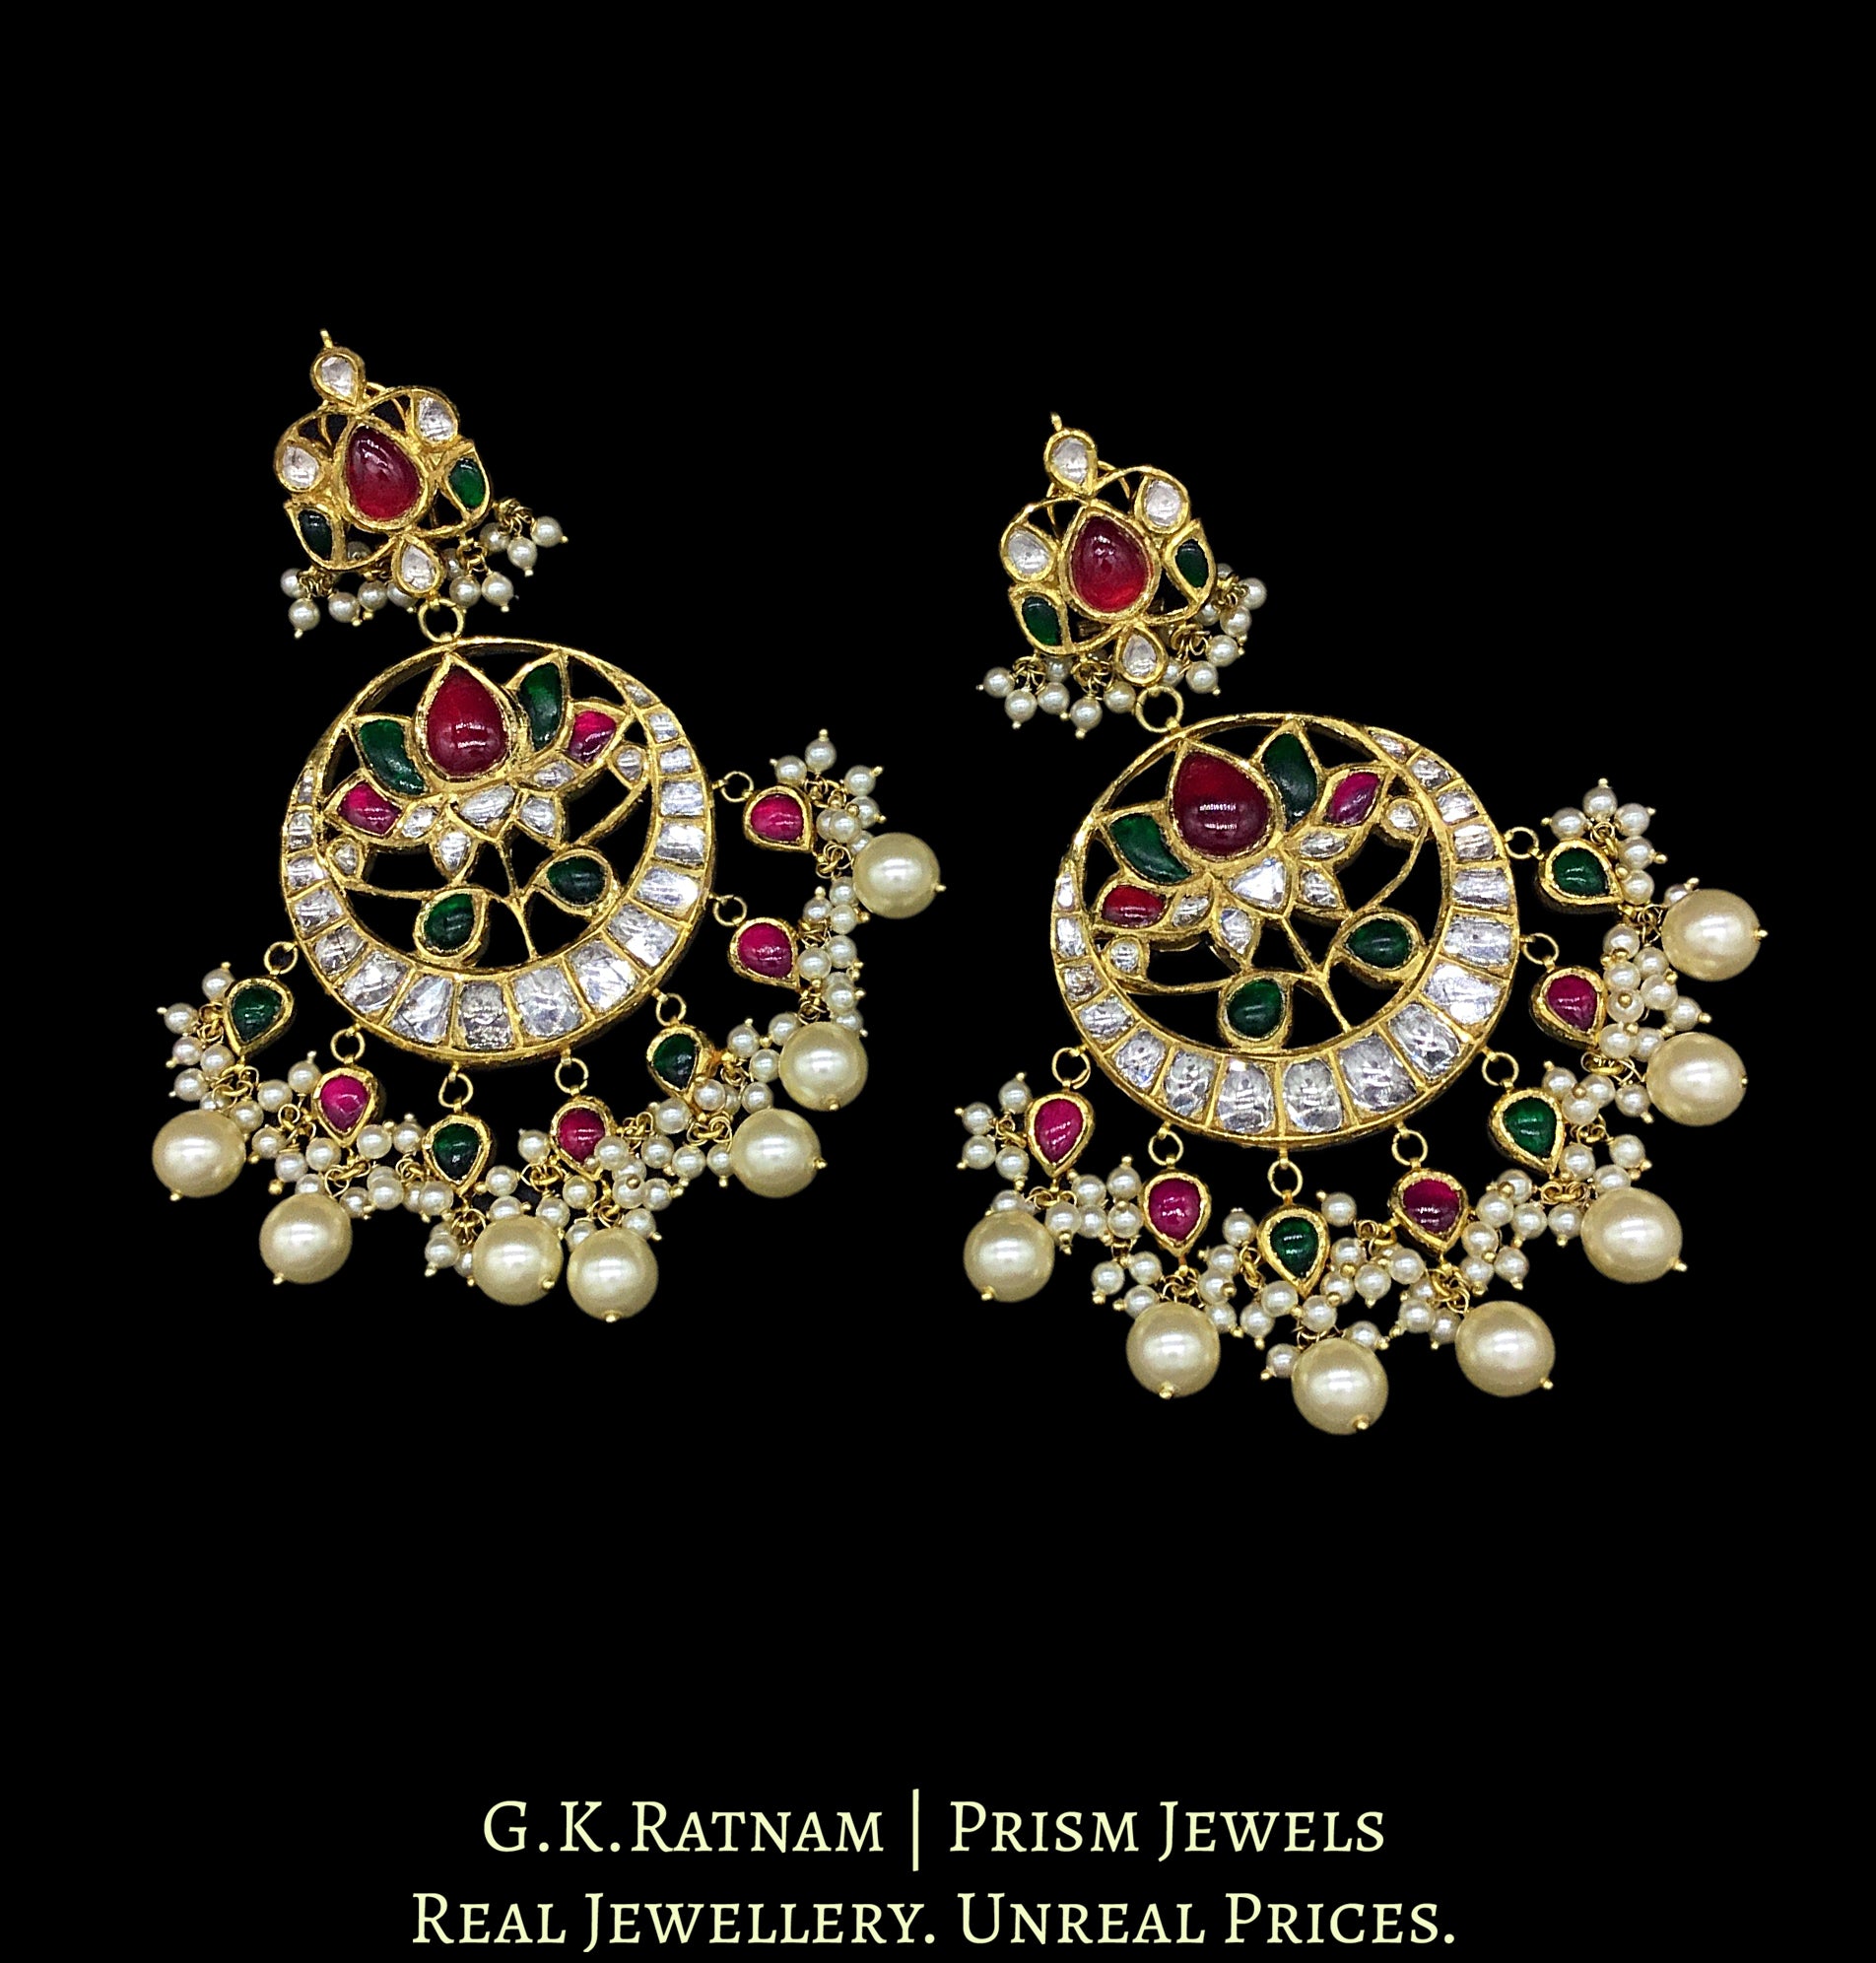 18k Gold and Diamond Polki Chand Bali Earring Pair with Ruby & Emerald grade color stones